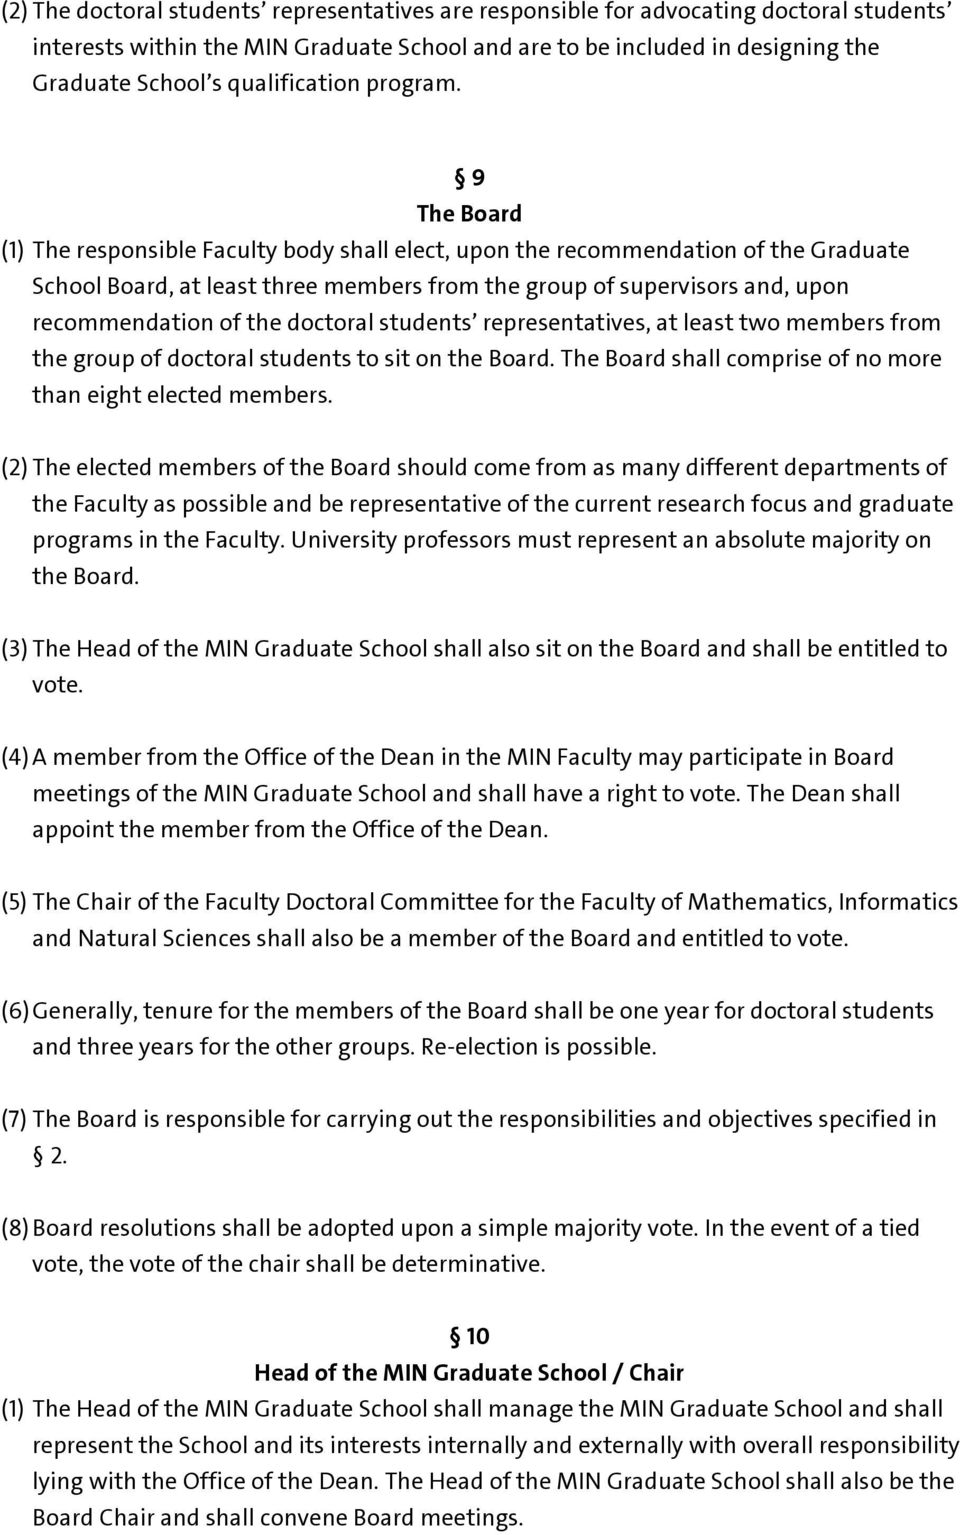 9 The Board (1) The responsible Faculty body shall elect, upon the recommendation of the Graduate School Board, at least three members from the group of supervisors and, upon recommendation of the